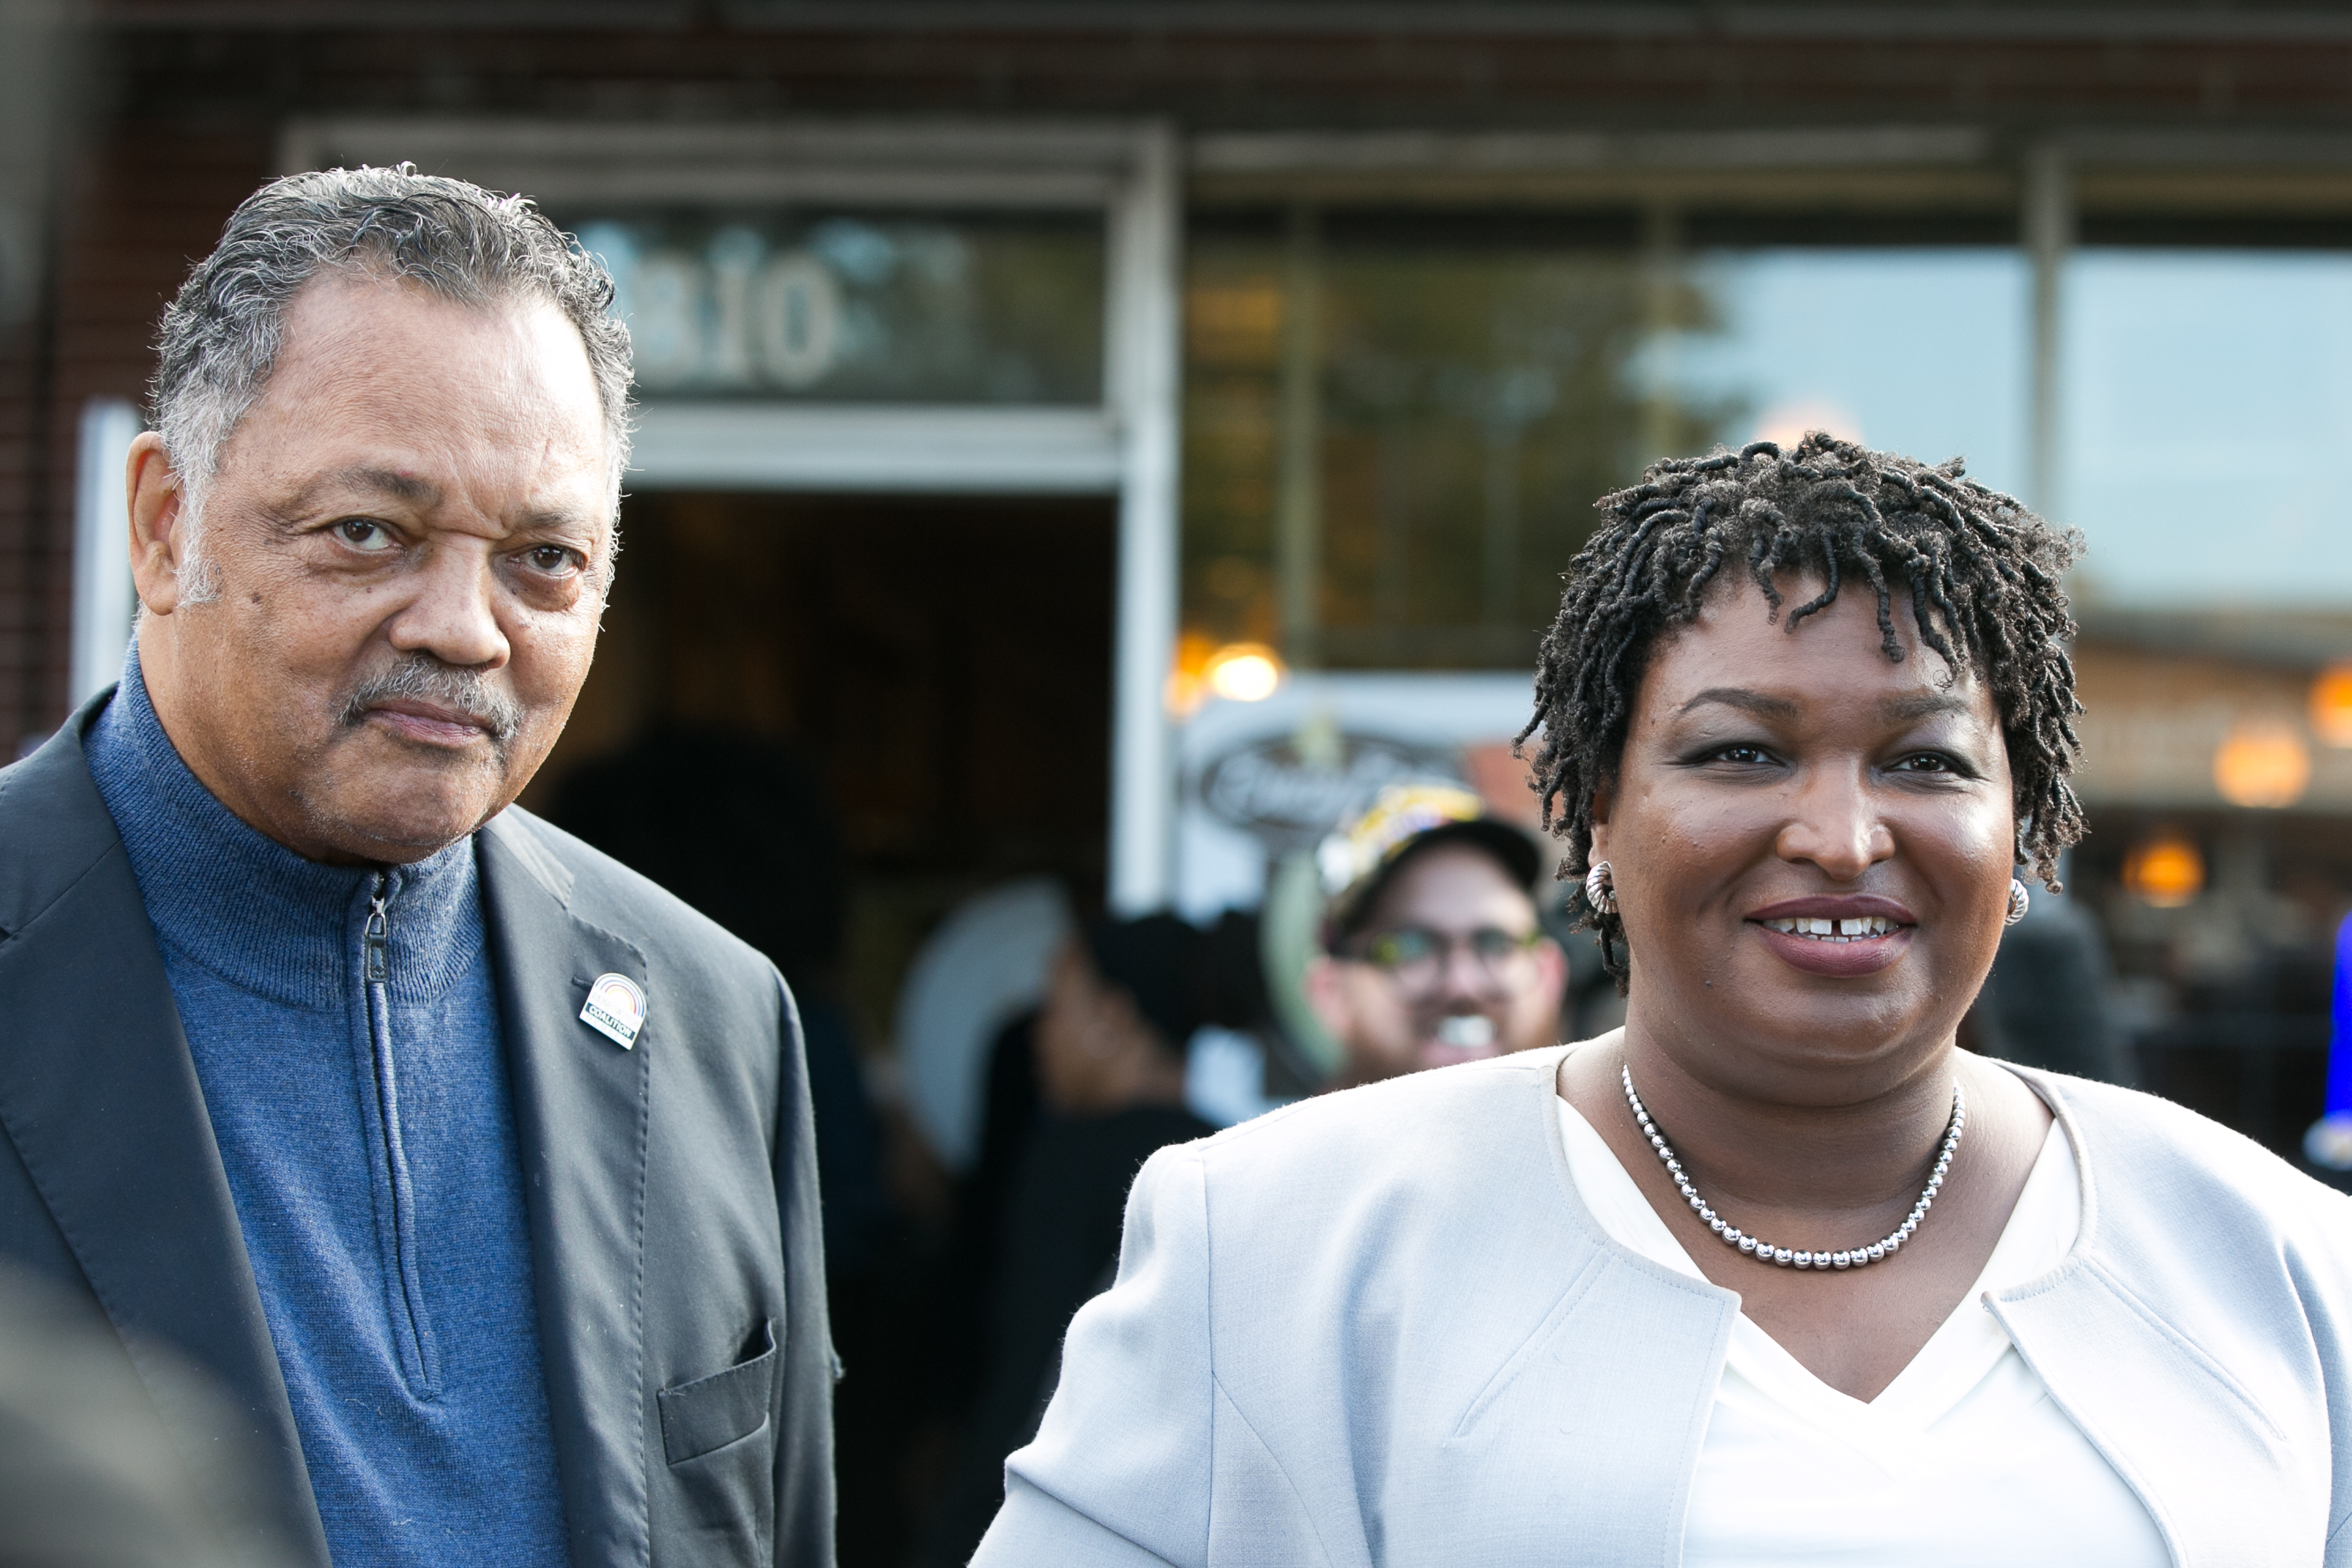 Rev. Jesse Jackson stands with Democratic Gubernatorial candidate Stacey Abrams outside the Busy Bee Cafe on November 6, 2018 in Atlanta, Georgia. (Jessica McGowan/Getty Images)